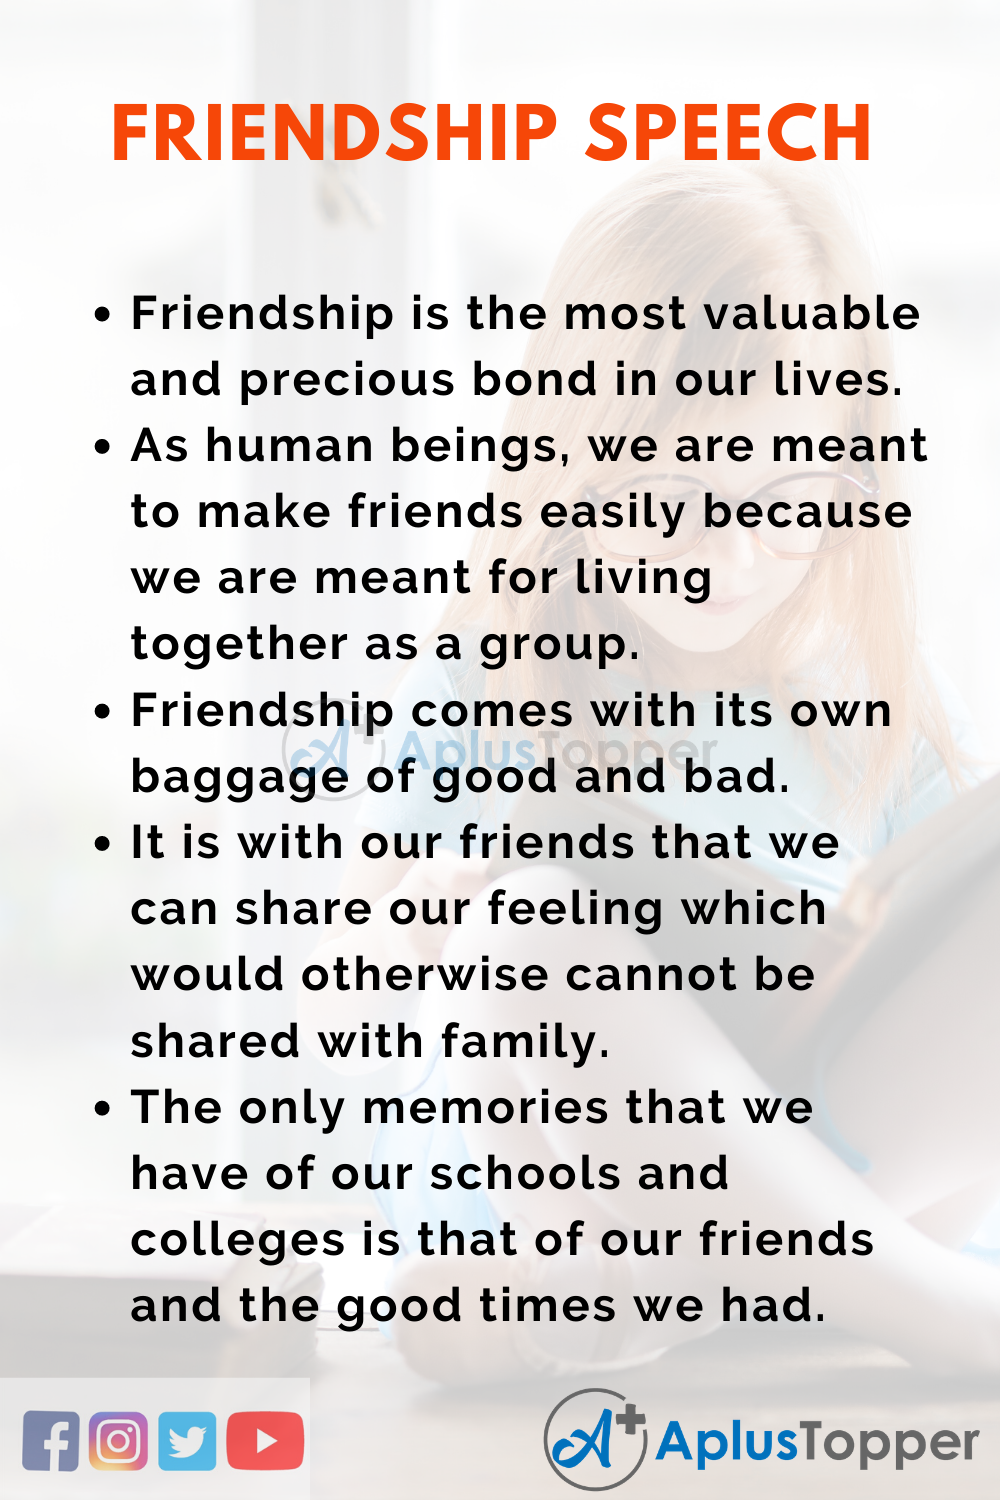 speech on importance of friends in our life